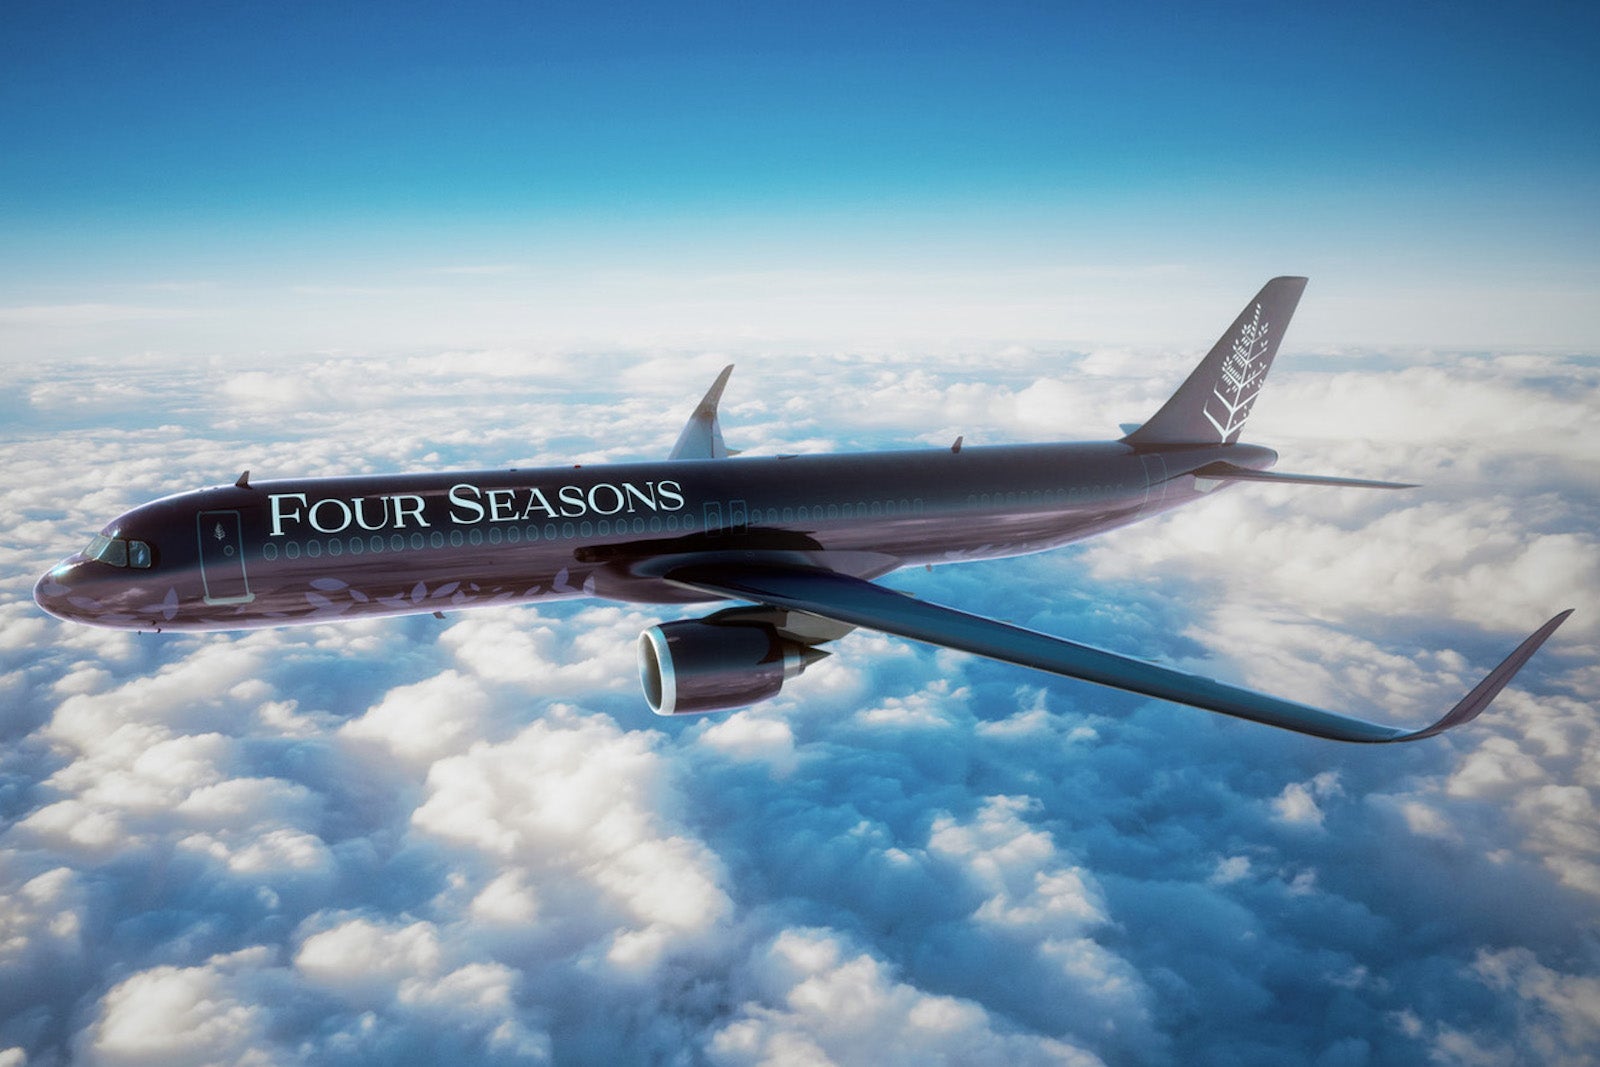 airplane with four seasons logo flying above clouds